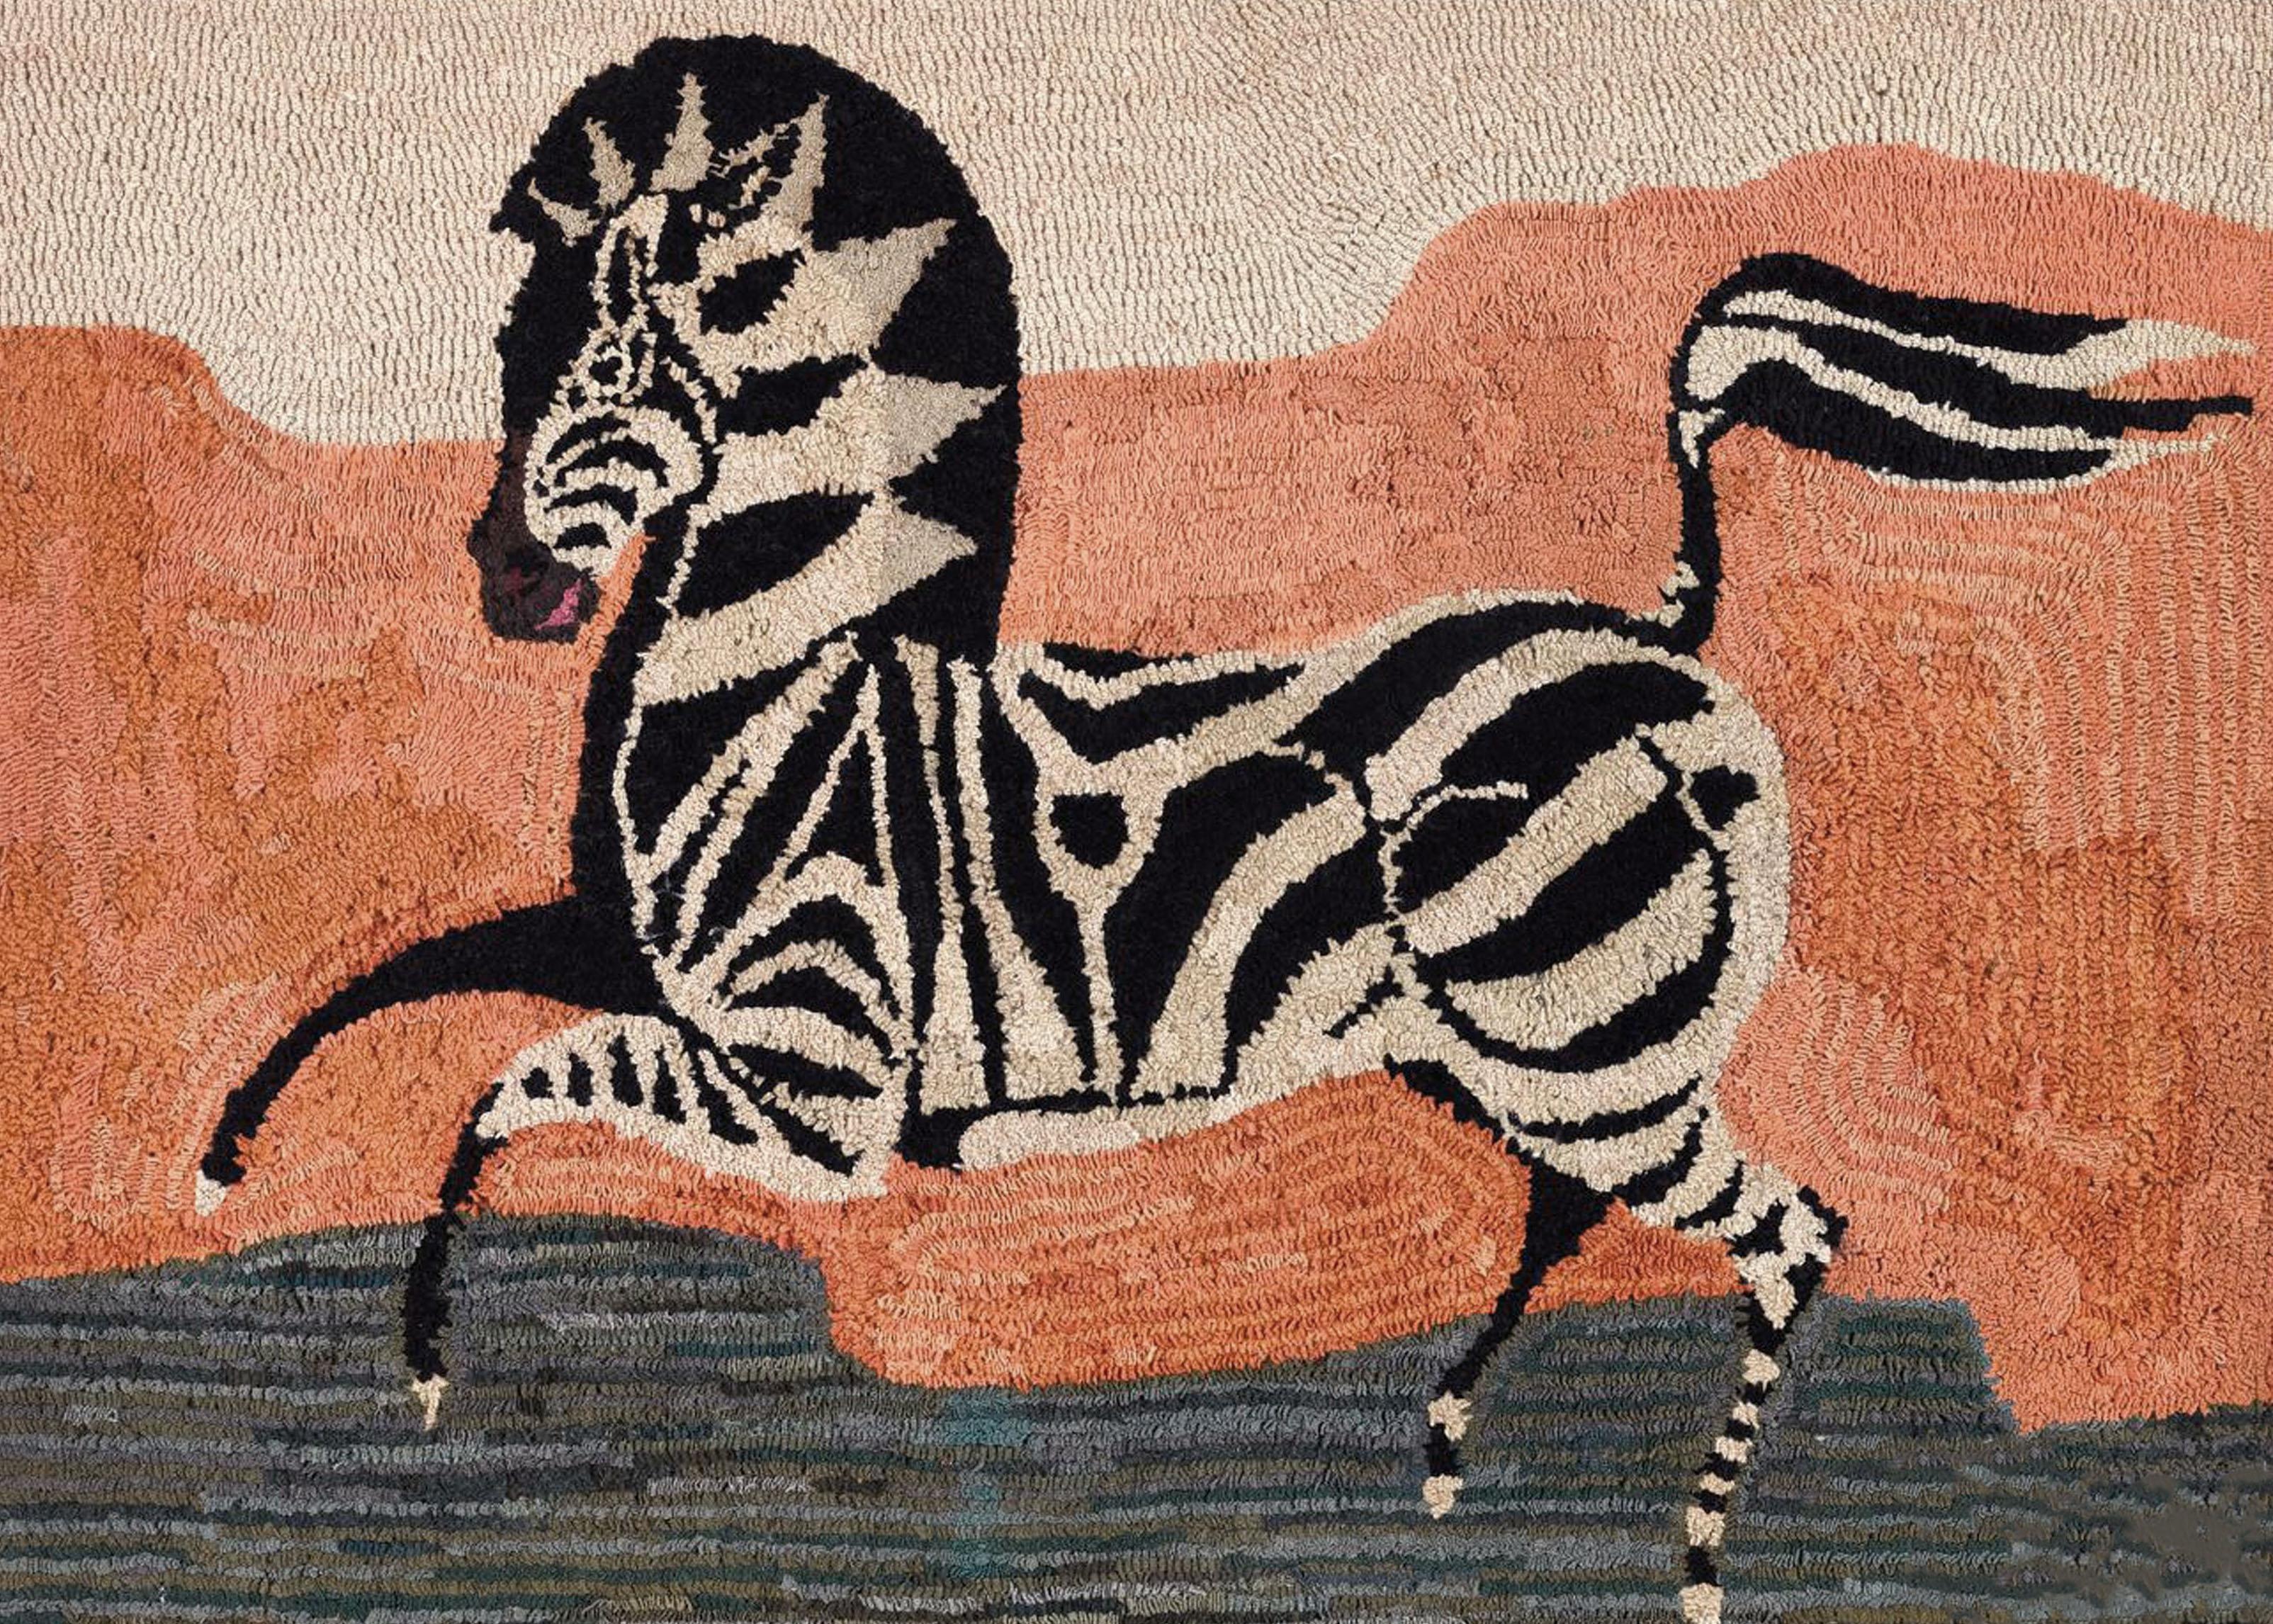 American Hooked rug Depicting a Zebra
early 20th century,

Dramatic American Folk Art hooked rug of a prancing Zebra depicted against bands of color-cream, orange, and a lower band of green grass. 

Mounted on black fabric covered